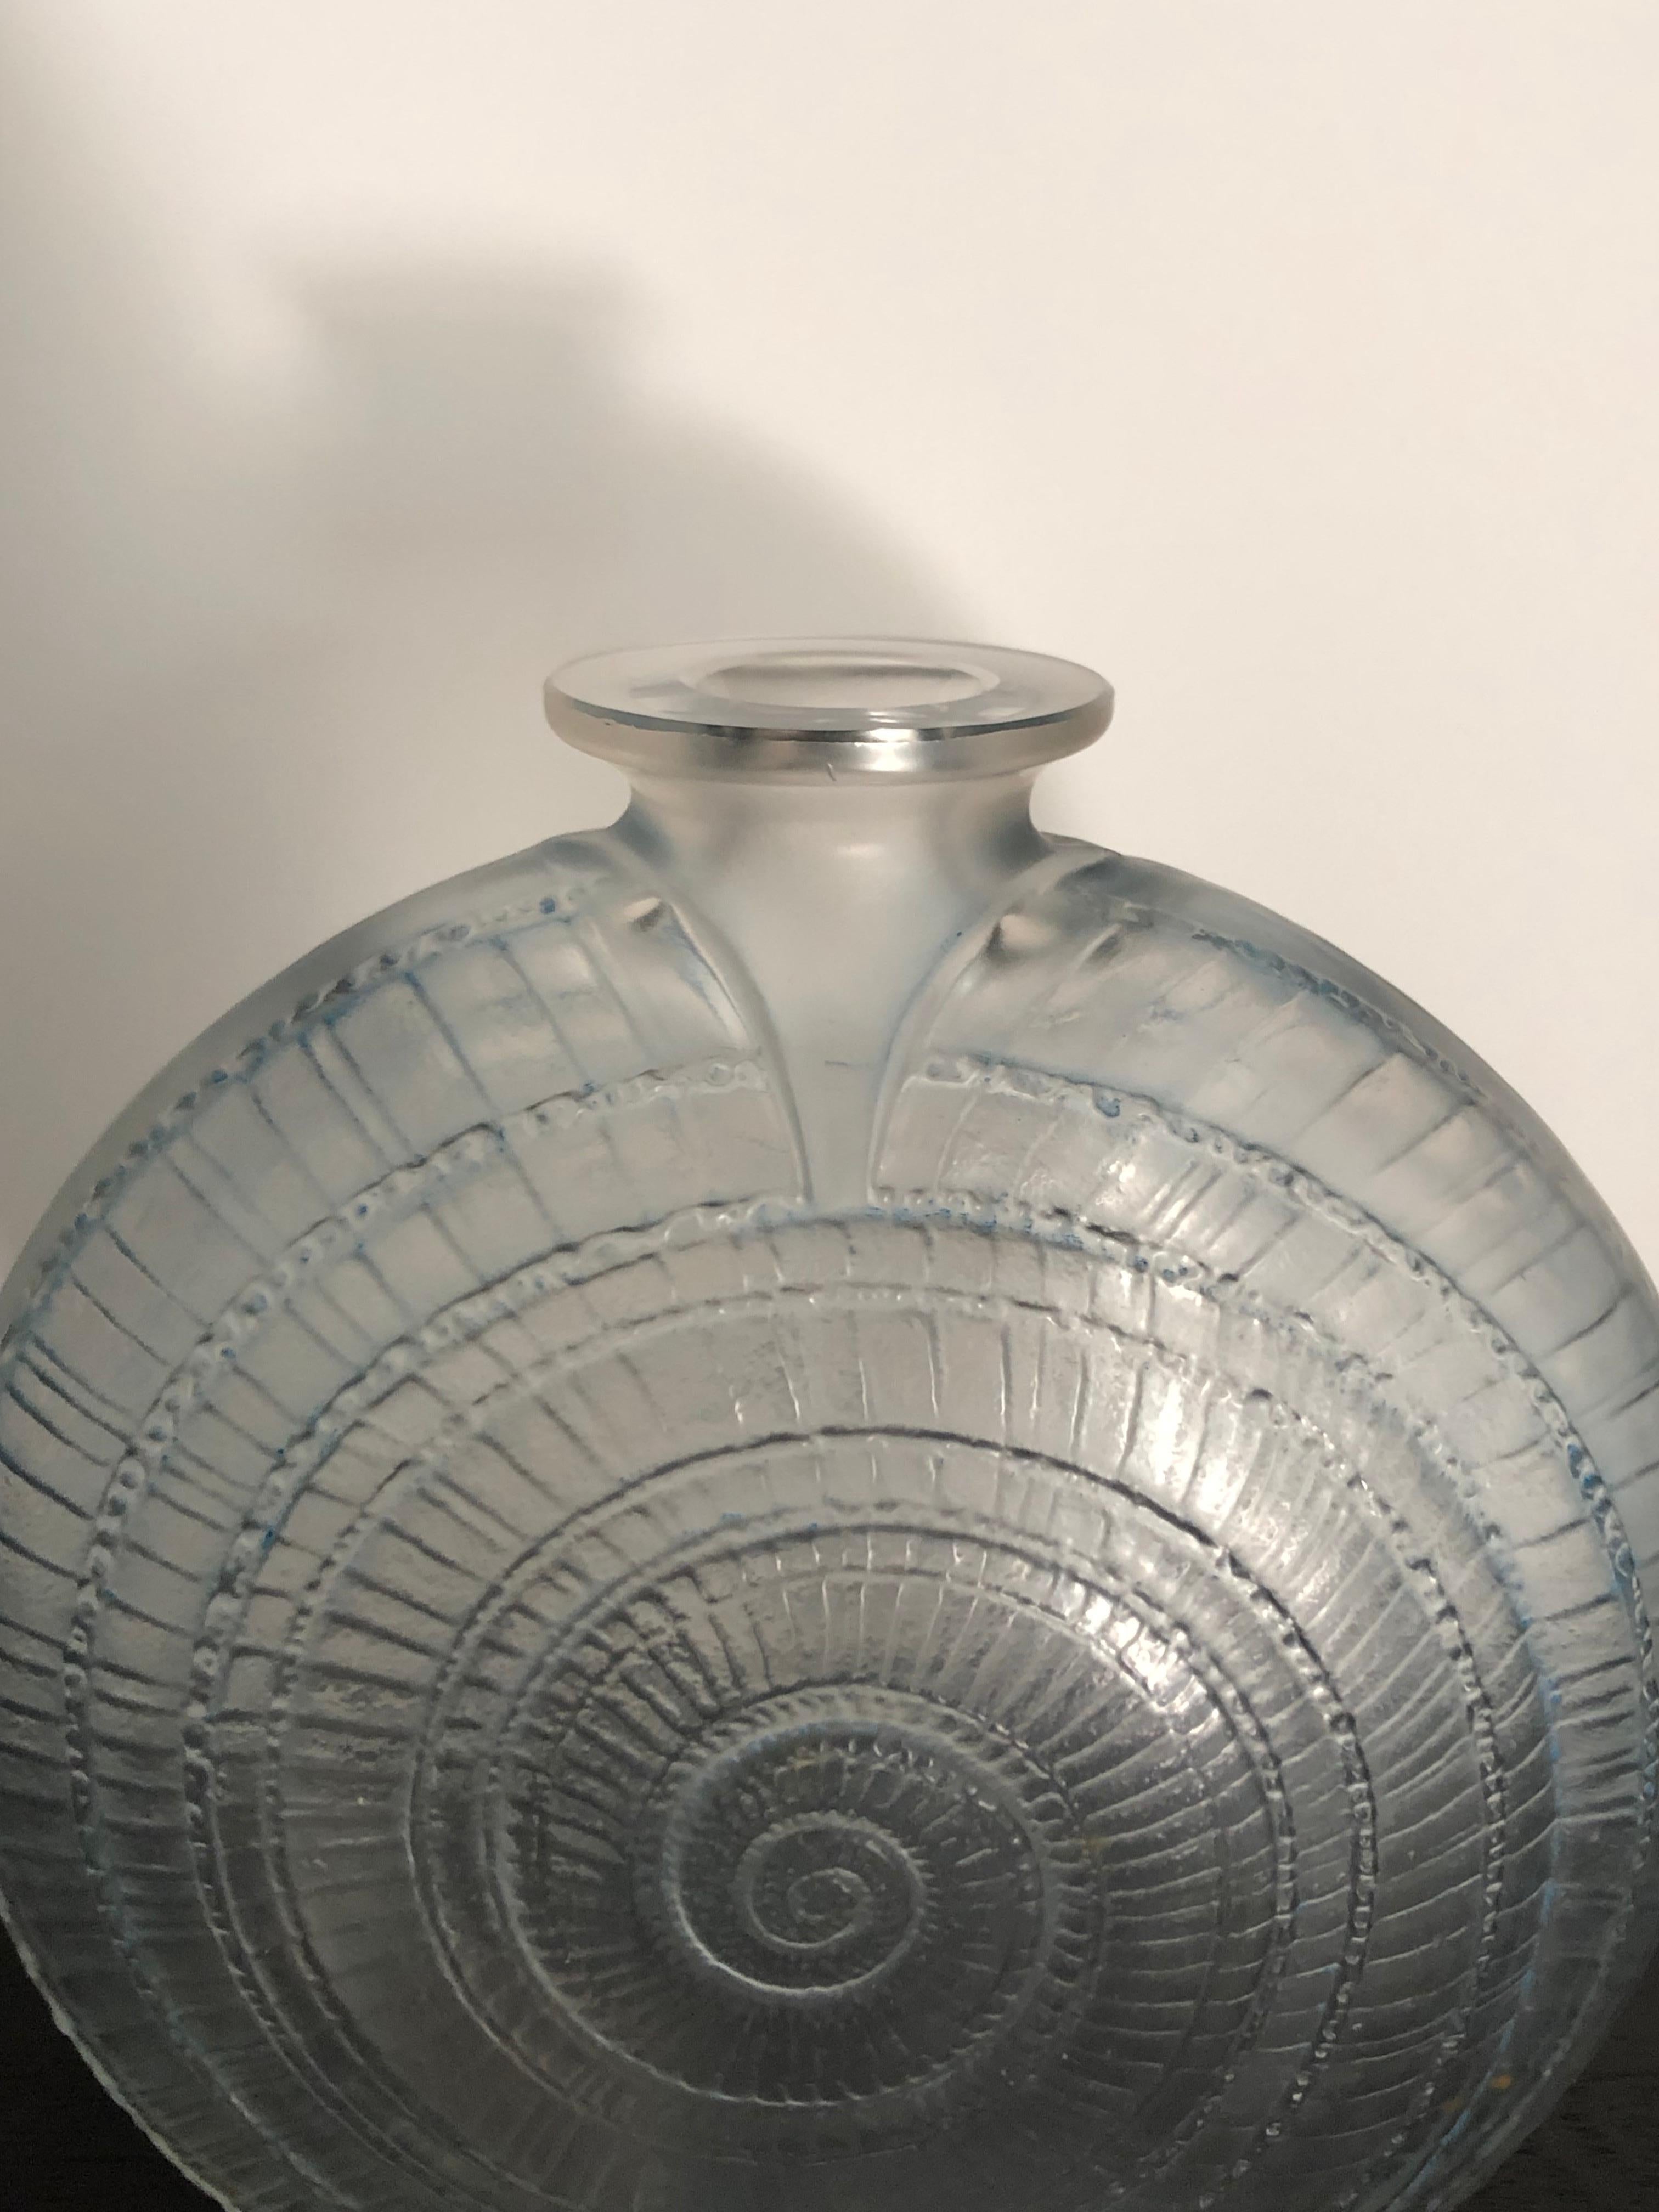 Molded 1920 René Lalique Escargot Vase in Frosted Glass Blue Stain - Snail